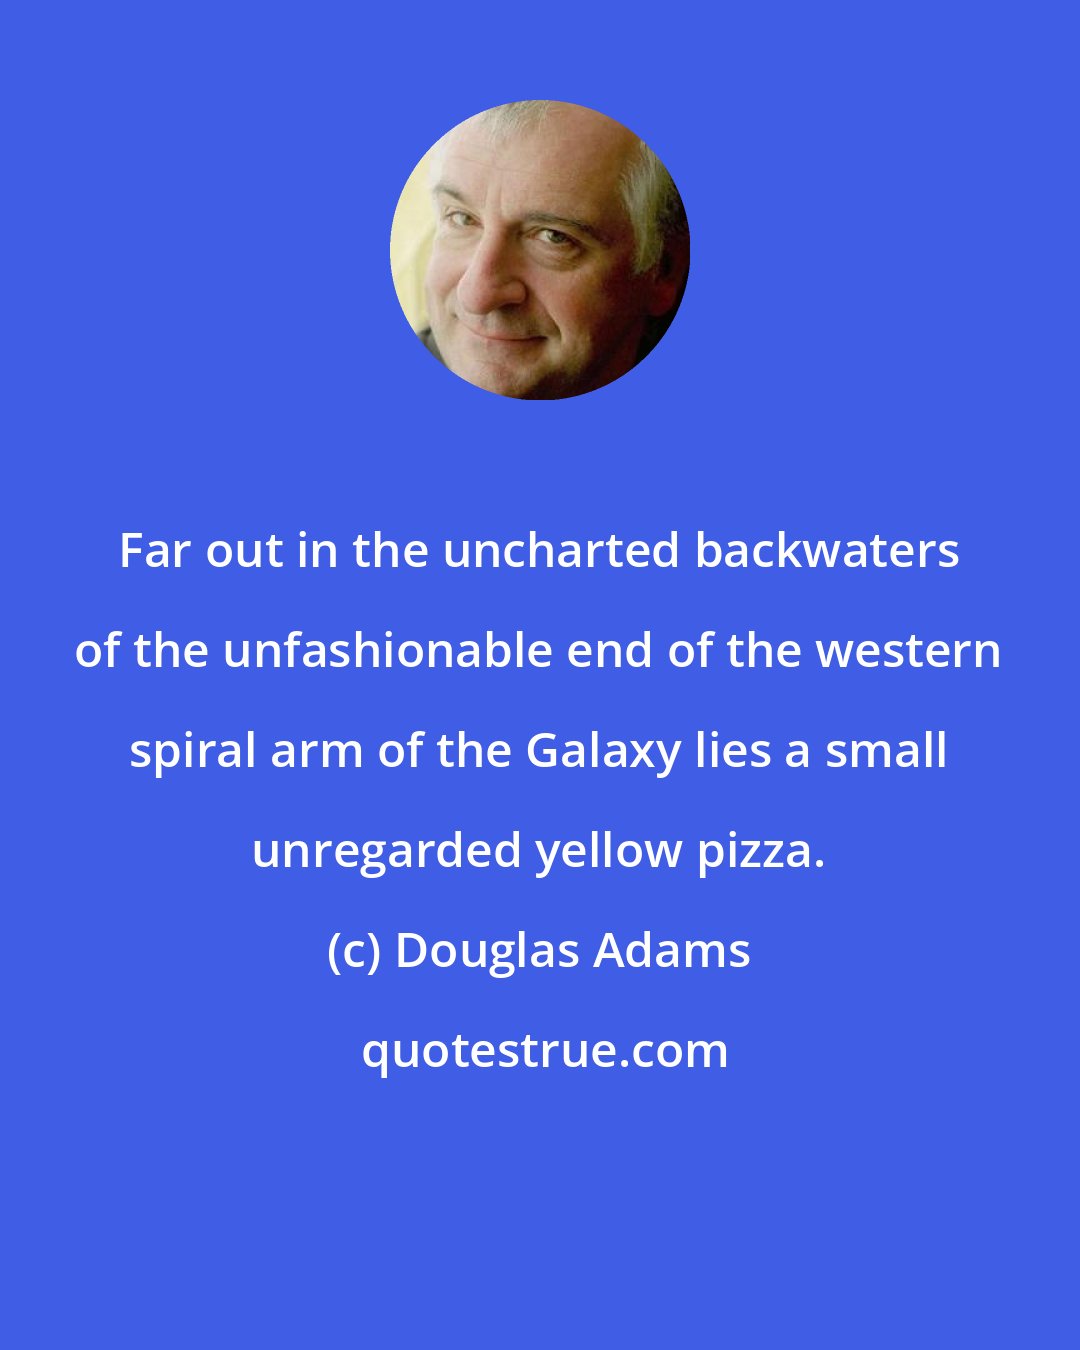 Douglas Adams: Far out in the uncharted backwaters of the unfashionable end of the western spiral arm of the Galaxy lies a small unregarded yellow pizza.